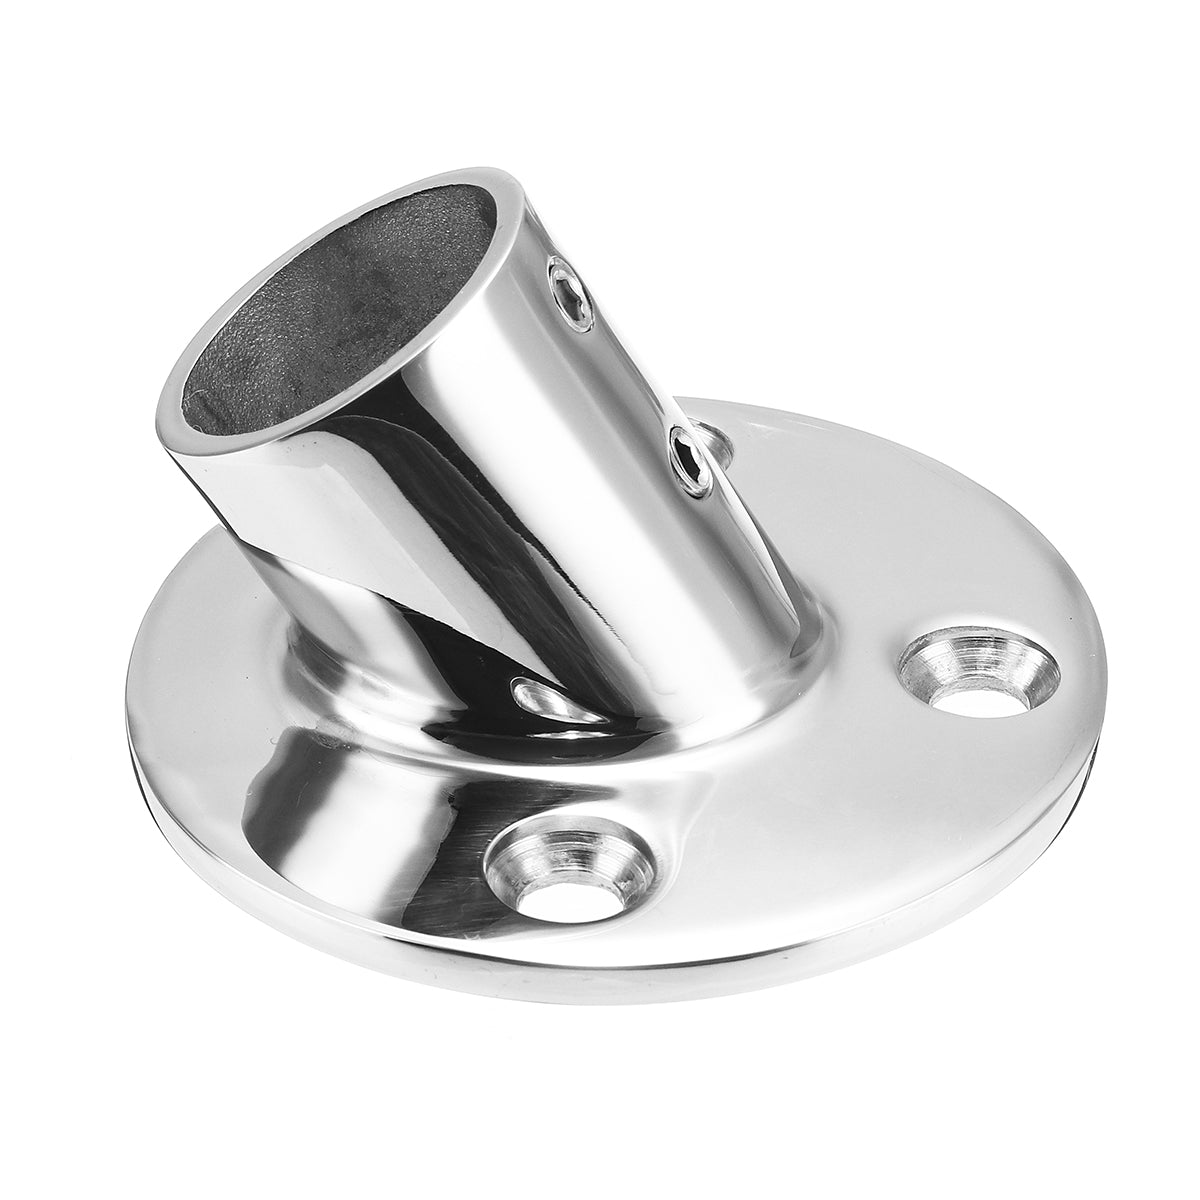 Lavender 60° Railing Handrail Pipes Base Fittings Support 316 Stainless Steel For Marine Boat Hardware